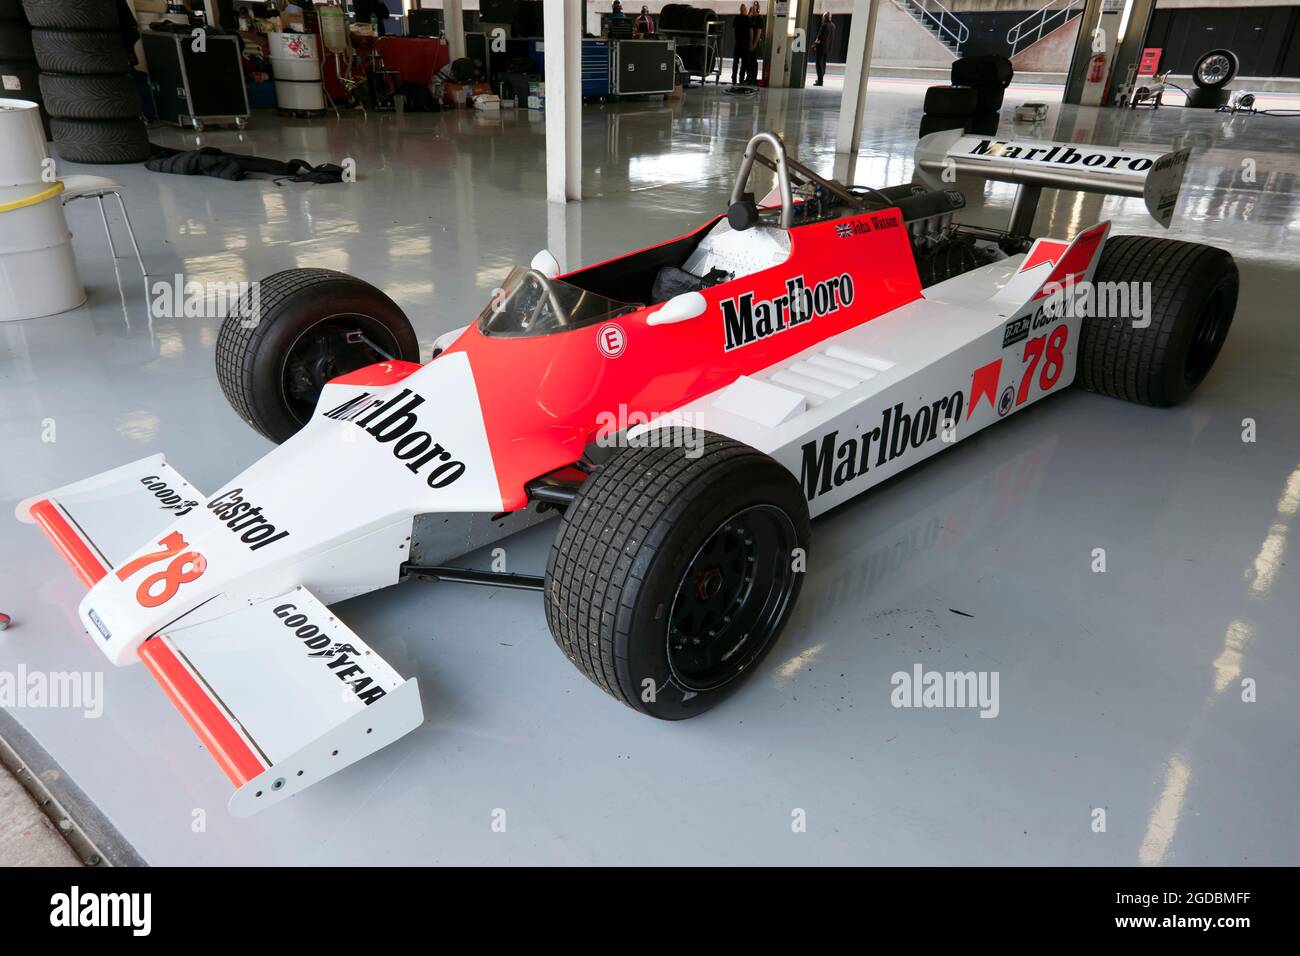 Warren Briggs 1980, Red and White McLaren M29, formerly driven by John Watson, in the International Pits, at the 2021 Silverstone Classic Stock Photo